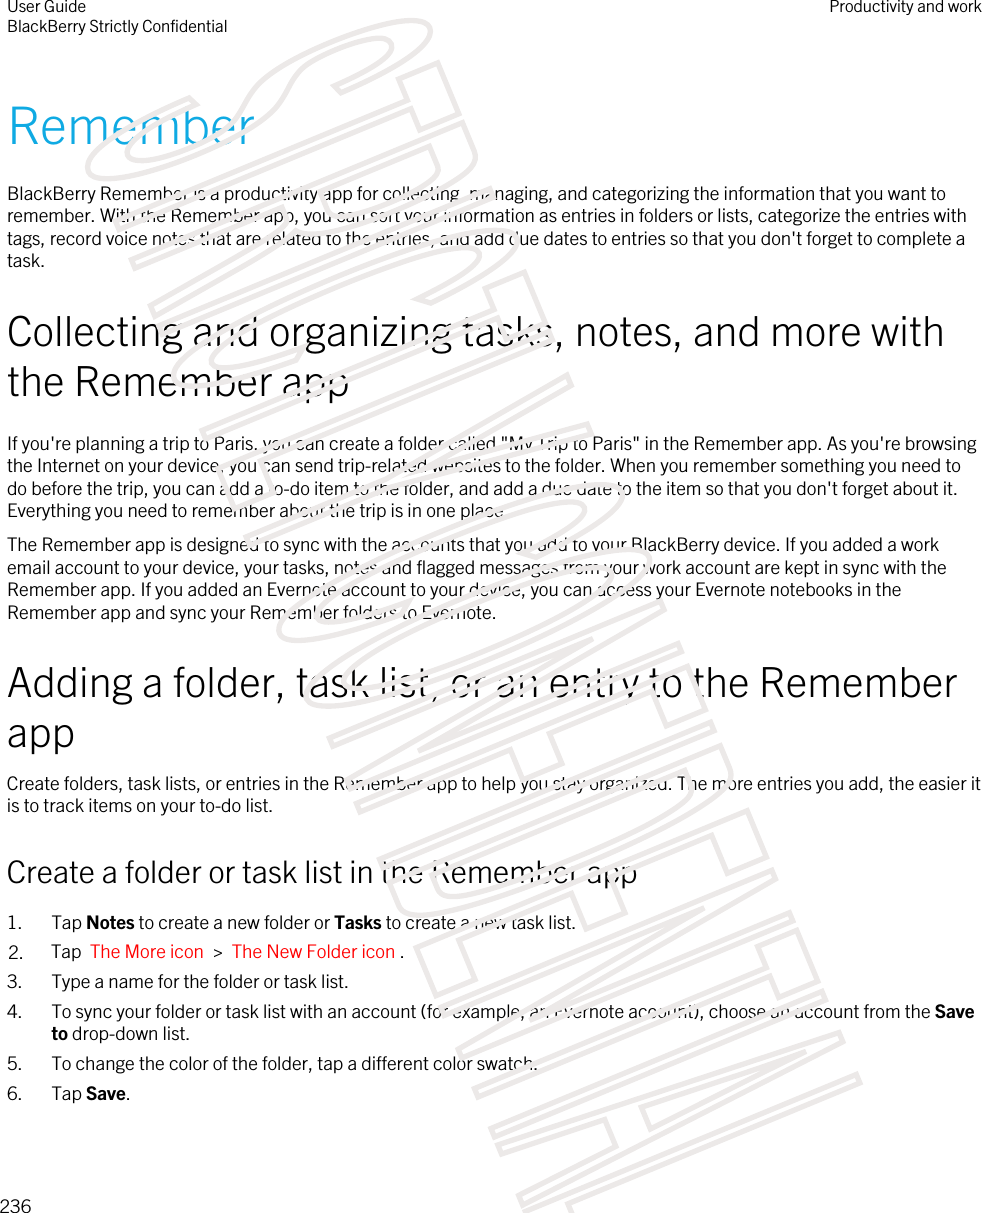 RememberBlackBerry Remember is a productivity app for collecting, managing, and categorizing the information that you want to remember. With the Remember app, you can sort your information as entries in folders or lists, categorize the entries with tags, record voice notes that are related to the entries, and add due dates to entries so that you don&apos;t forget to complete a task.Collecting and organizing tasks, notes, and more with the Remember appIf you&apos;re planning a trip to Paris, you can create a folder called &quot;My Trip to Paris&quot; in the Remember app. As you&apos;re browsing the Internet on your device, you can send trip-related websites to the folder. When you remember something you need to do before the trip, you can add a to-do item to the folder, and add a due date to the item so that you don&apos;t forget about it. Everything you need to remember about the trip is in one place.The Remember app is designed to sync with the accounts that you add to your BlackBerry device. If you added a work email account to your device, your tasks, notes and flagged messages from your work account are kept in sync with the Remember app. If you added an Evernote account to your device, you can access your Evernote notebooks in the Remember app and sync your Remember folders to Evernote.Adding a folder, task list, or an entry to the Remember appCreate folders, task lists, or entries in the Remember app to help you stay organized. The more entries you add, the easier it is to track items on your to-do list.Create a folder or task list in the Remember app1. Tap Notes to create a new folder or Tasks to create a new task list.2. Tap  The More icon  &gt;  The New Folder icon .3. Type a name for the folder or task list.4. To sync your folder or task list with an account (for example, an Evernote account), choose an account from the Save to drop-down list.5. To change the color of the folder, tap a different color swatch.6. Tap Save.User GuideBlackBerry Strictly Confidential Productivity and work236STRICTLY CONFIDENTIAL